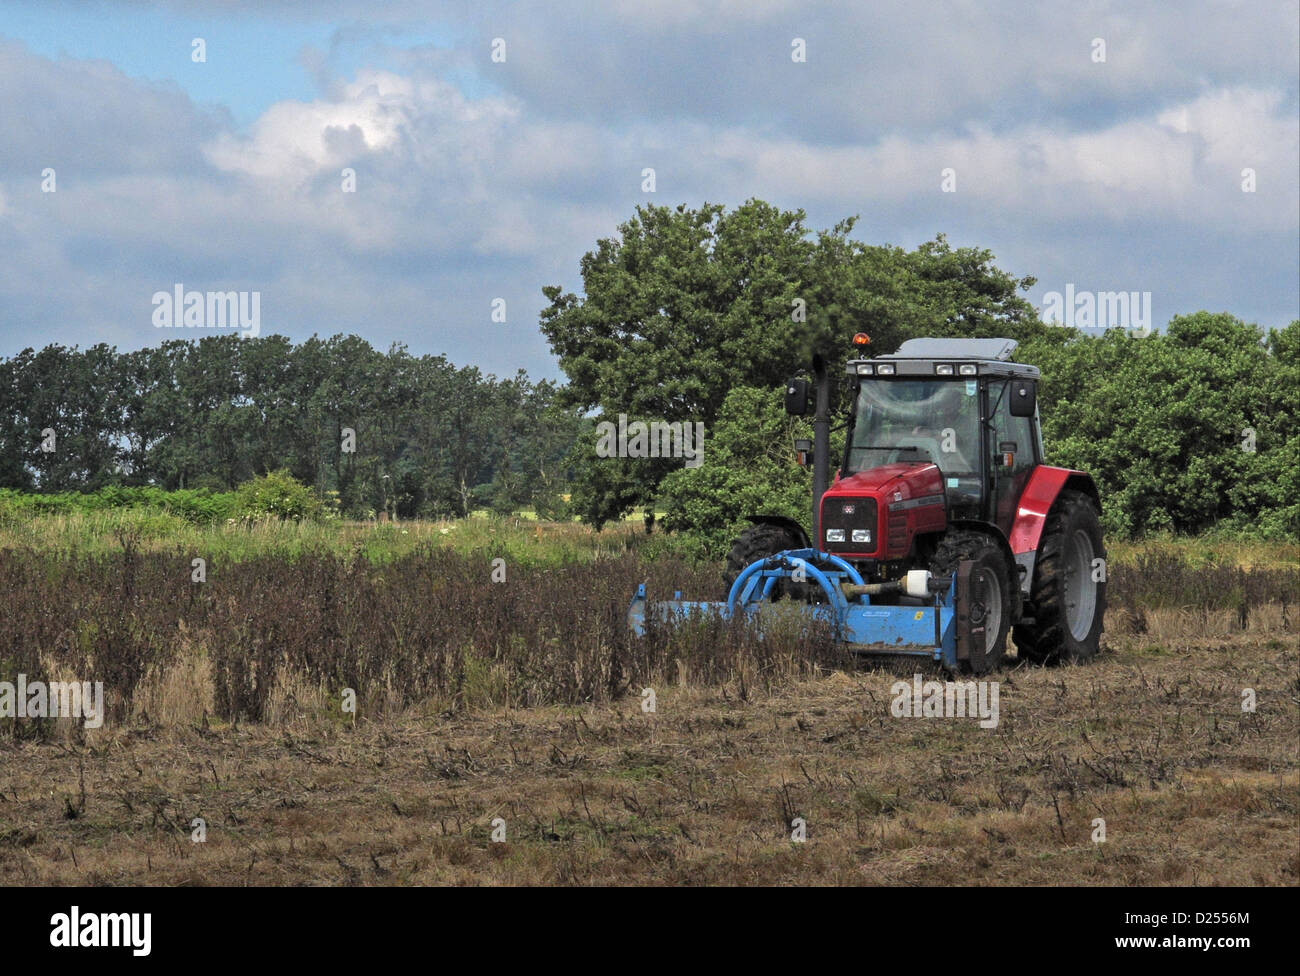 Tractor mowing sprayed thistles after spraying with Roundup herbicide on 'Higher Level Stewardship' land, Norfolk, England, July Stock Photo